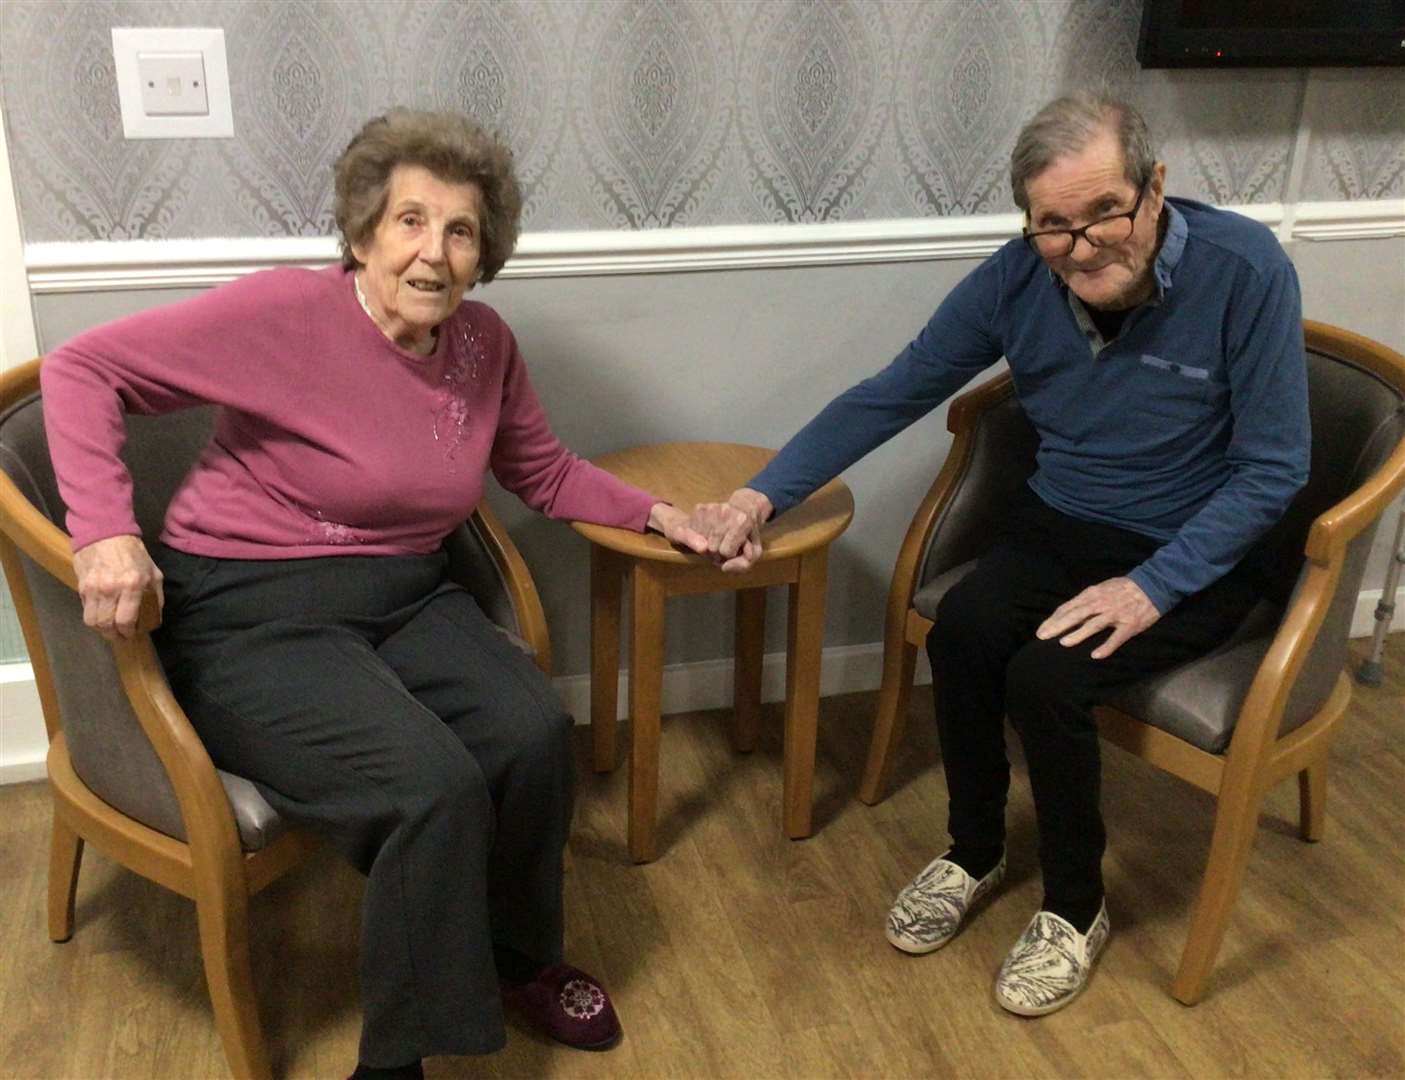 Beryl and Peter struck up a romance after meeting each other at Edward Moore care home in Gravesend